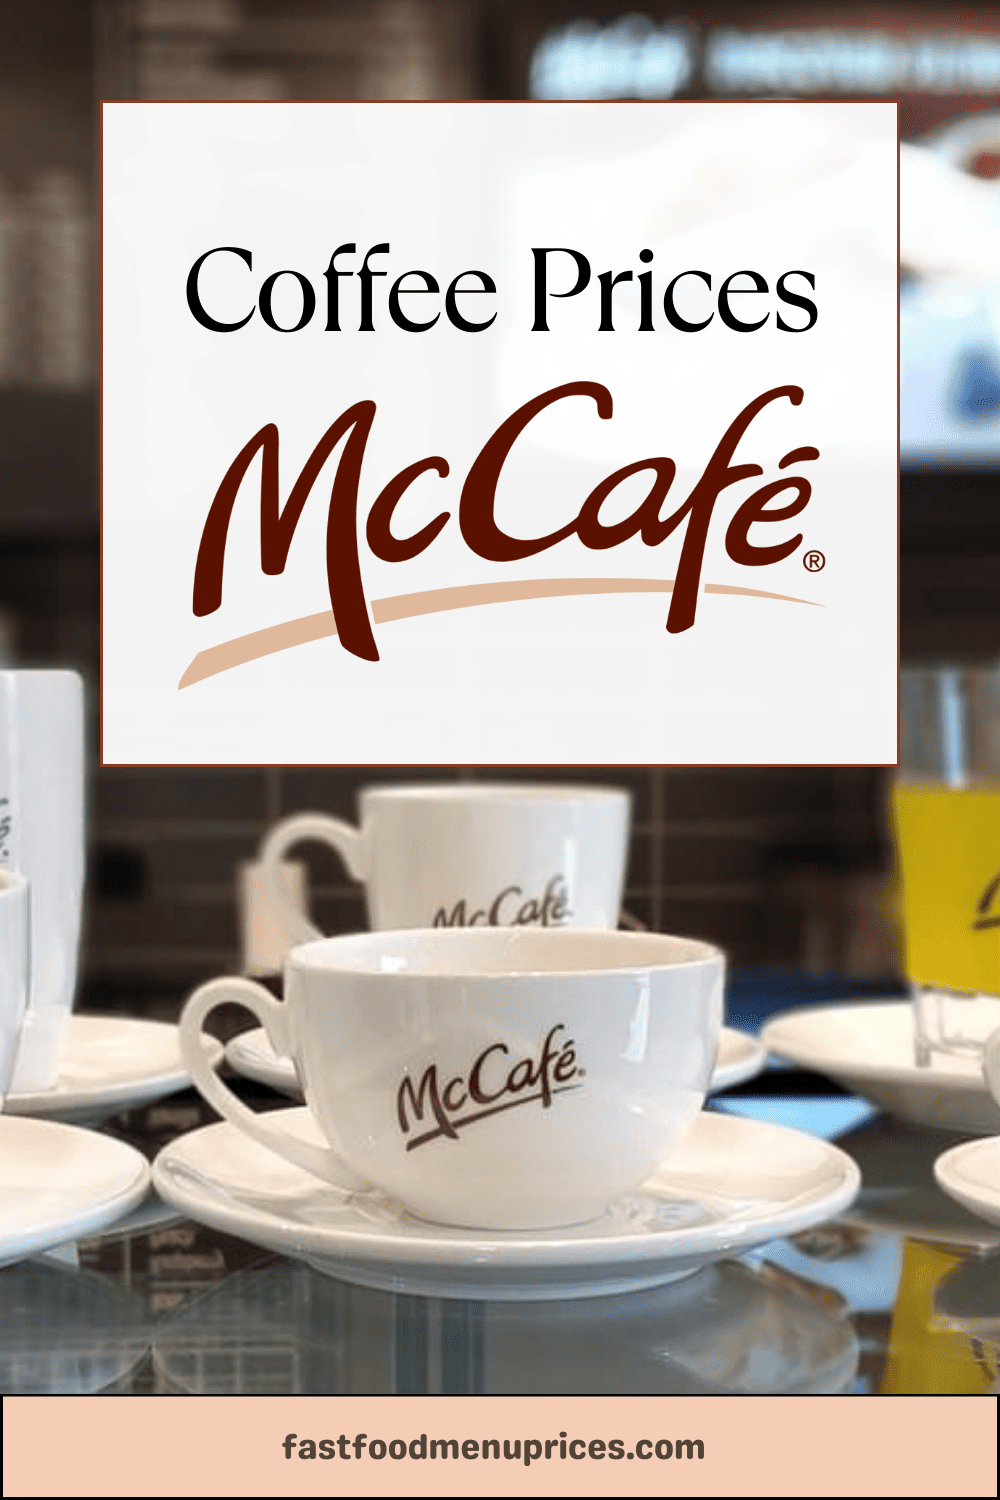 Discover the latest McCafe coffee prices and indulge in a delightful selection of beverages.